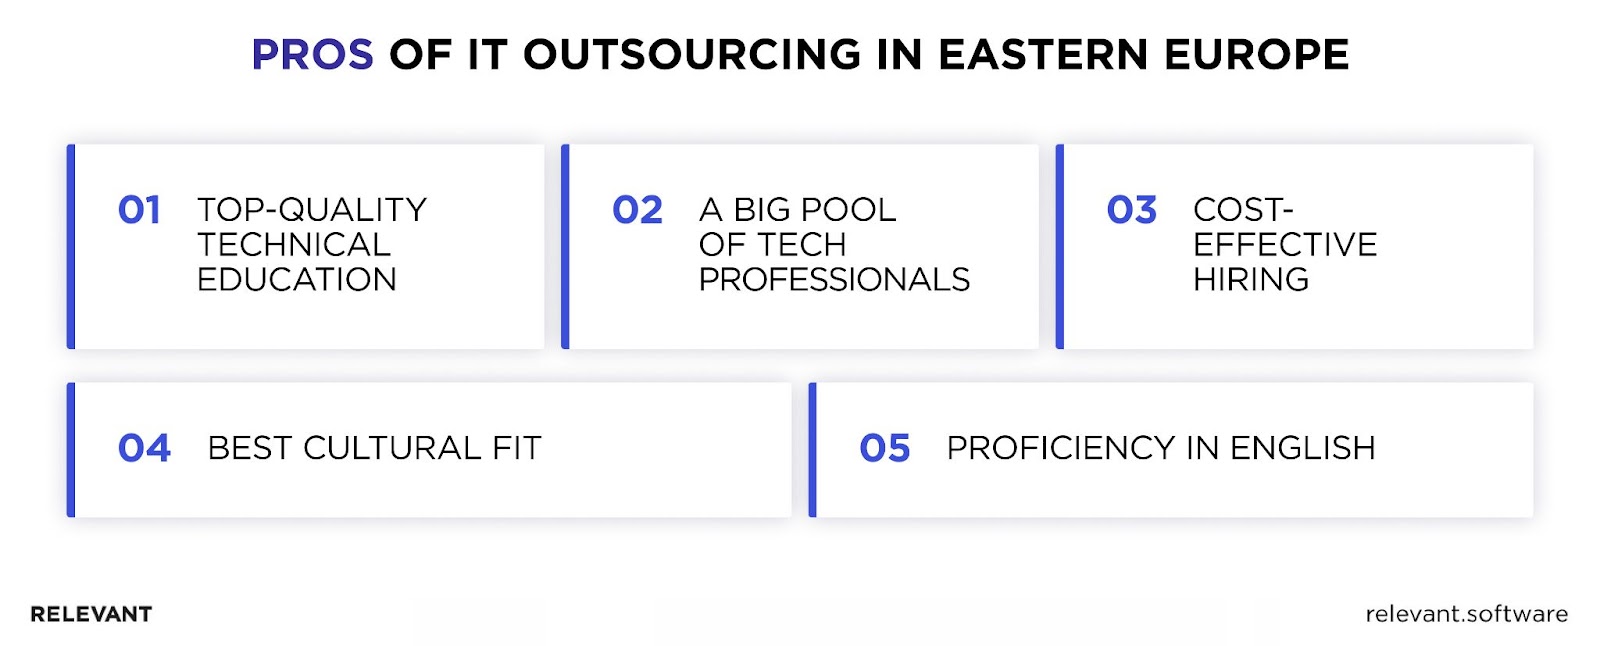 Pros of IT Outsourcing to Eastern Europe